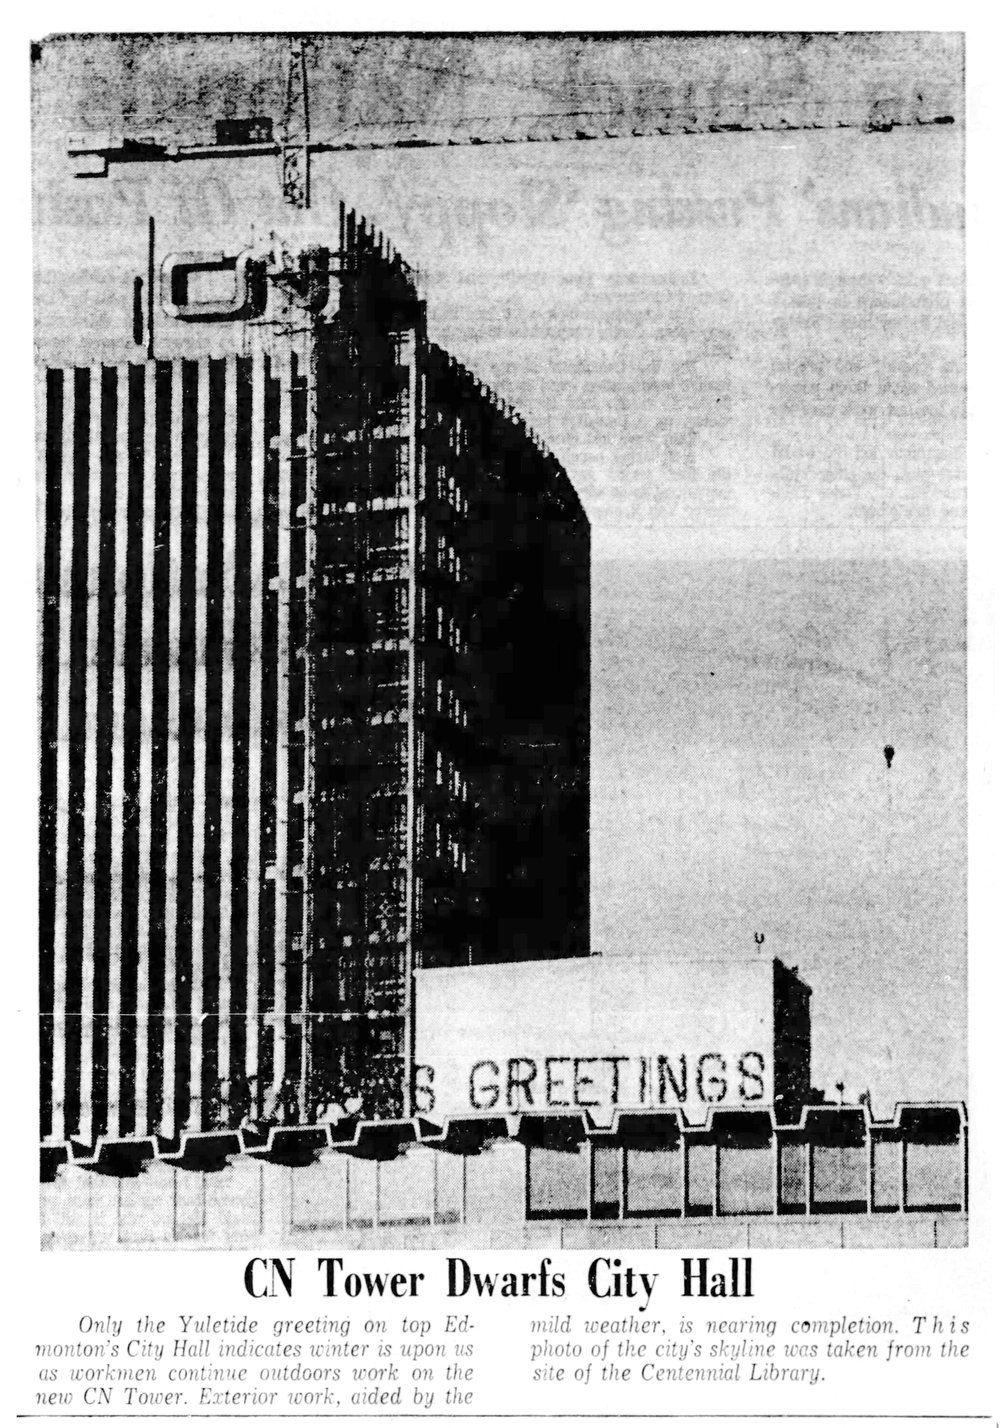  The C.N. Tower rapidly approaches completion in this December 1965 photo.    Edmonton Journal, December 18th, 1965.  